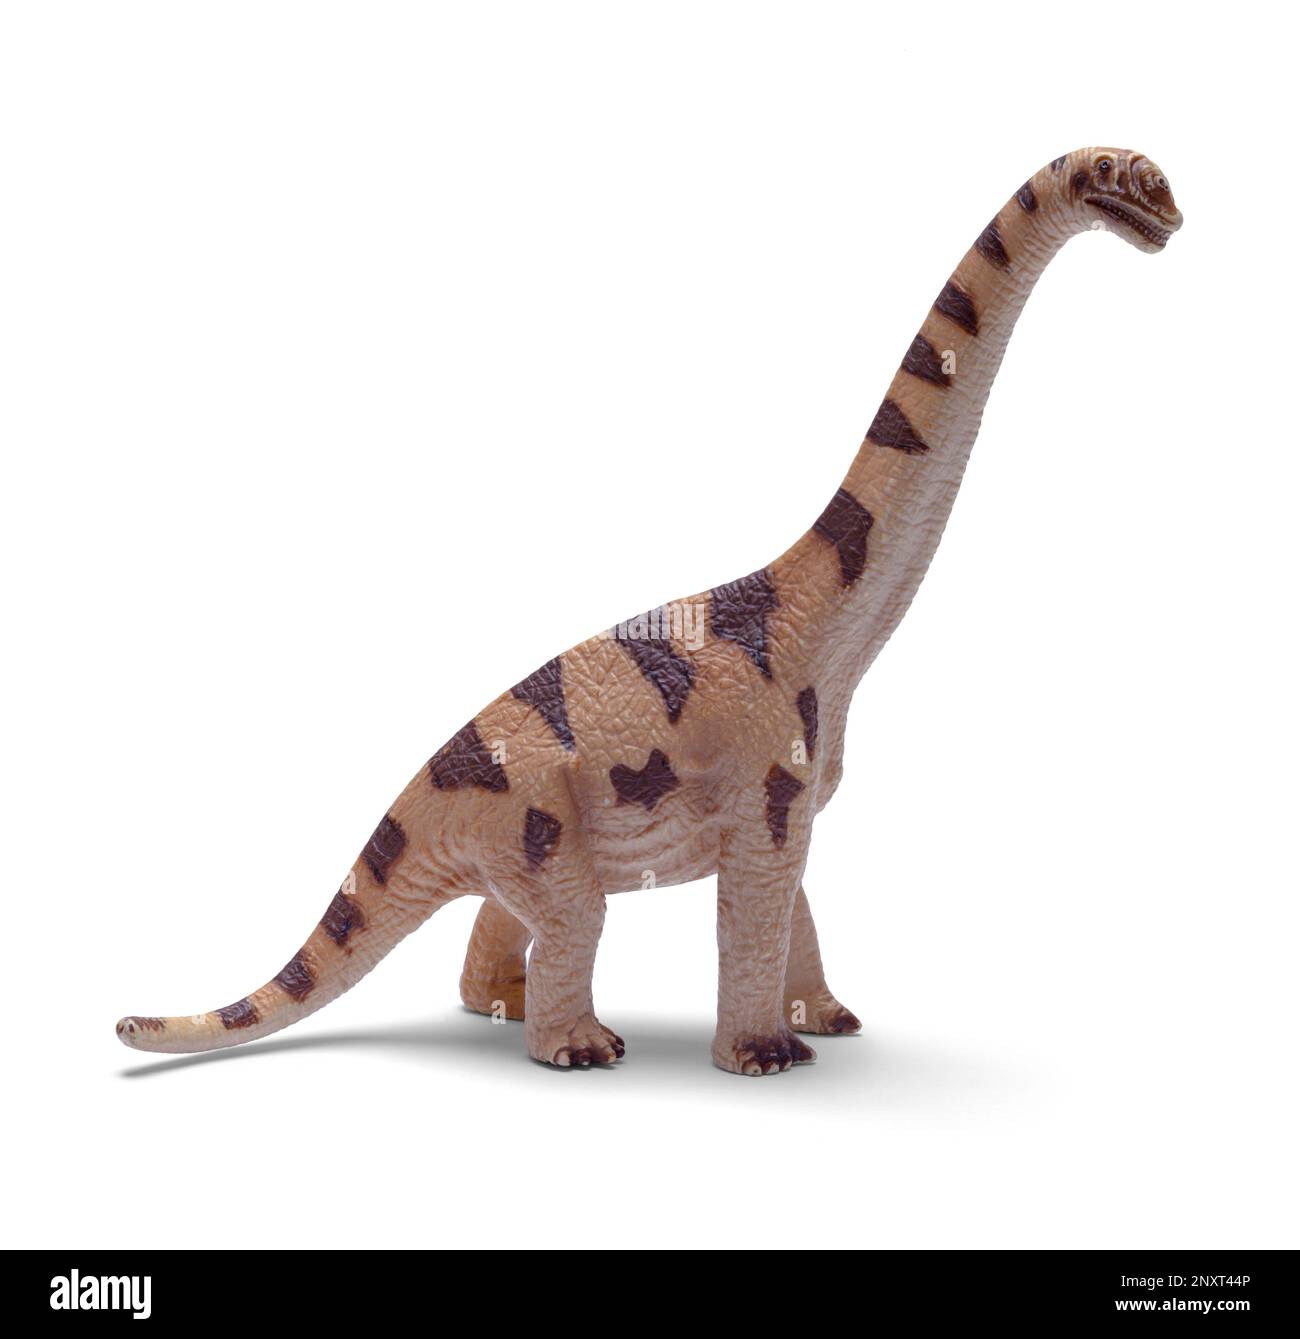 Long Neck Dinosaur Toy Cut Out on White. Stock Photo